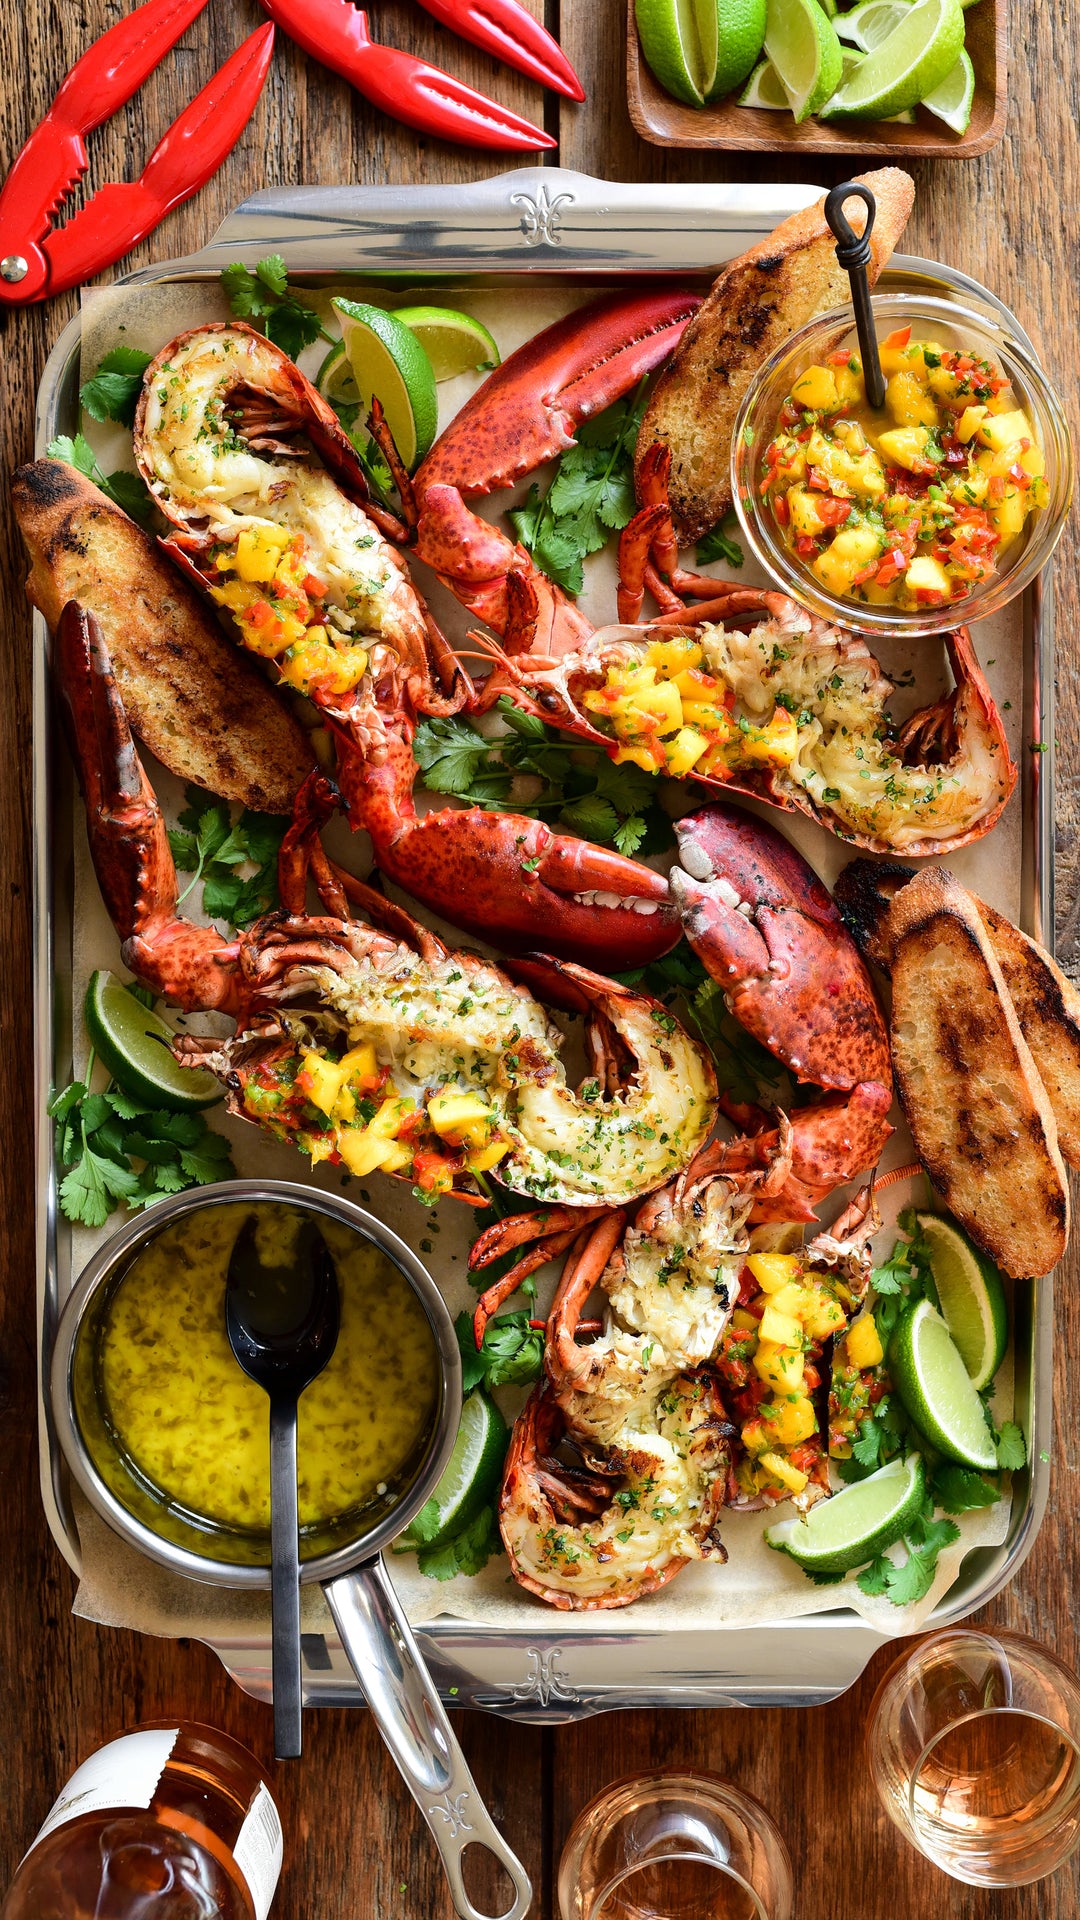 Grilled Lobster with a Mango-Jalapeño Salsa